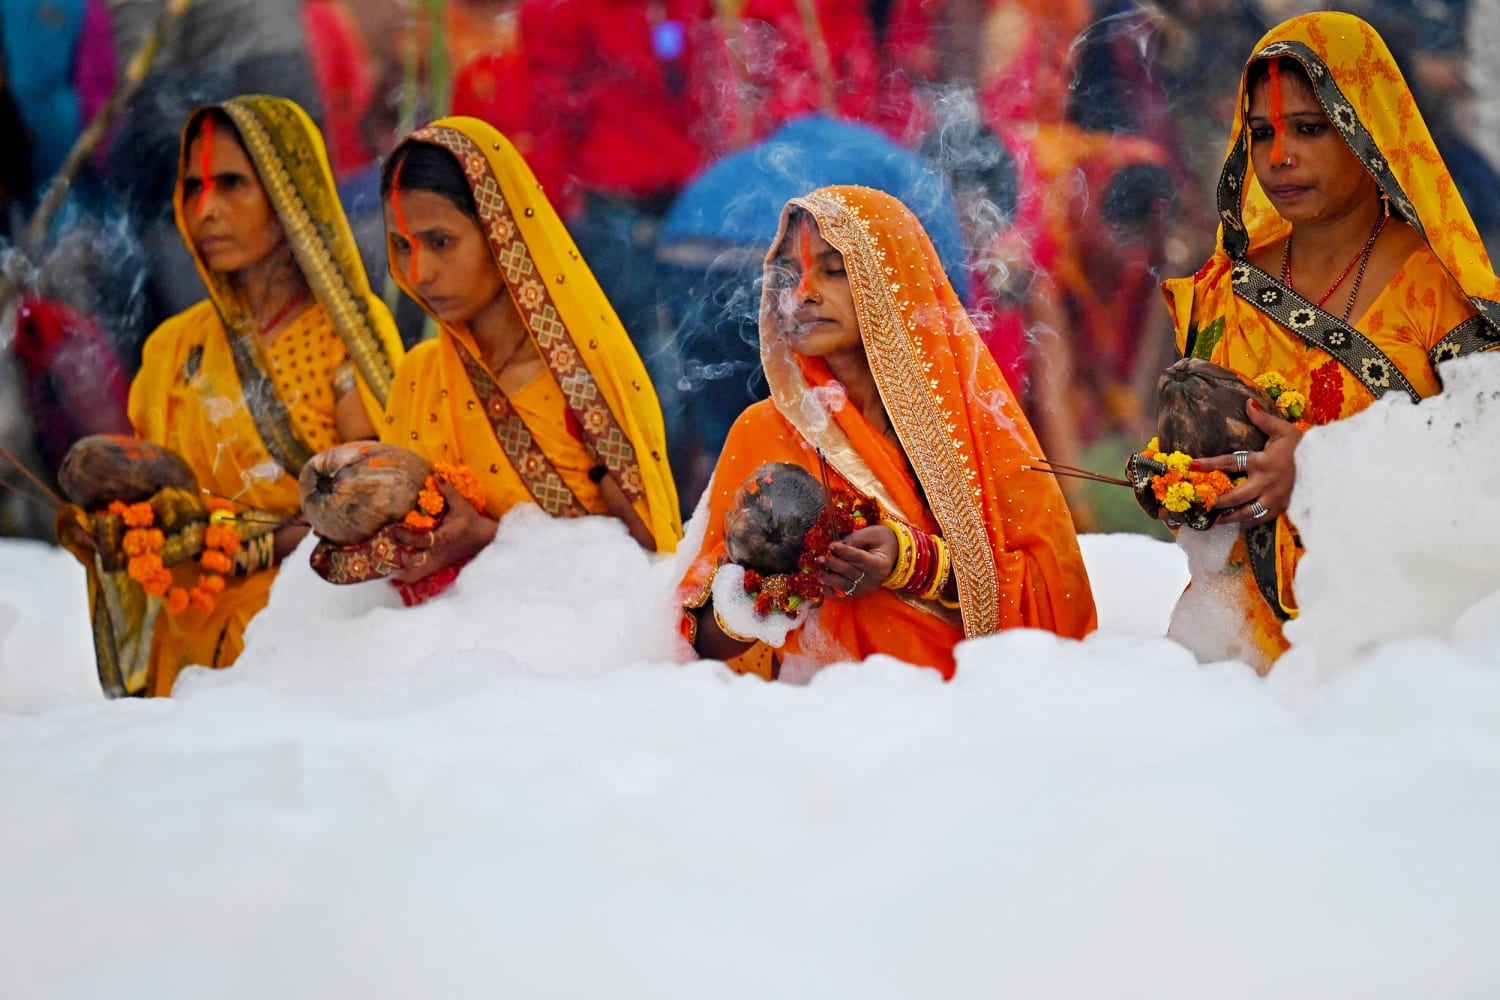 Hindu worshippers face blanket of toxic white foam on sacred river in New Delhi